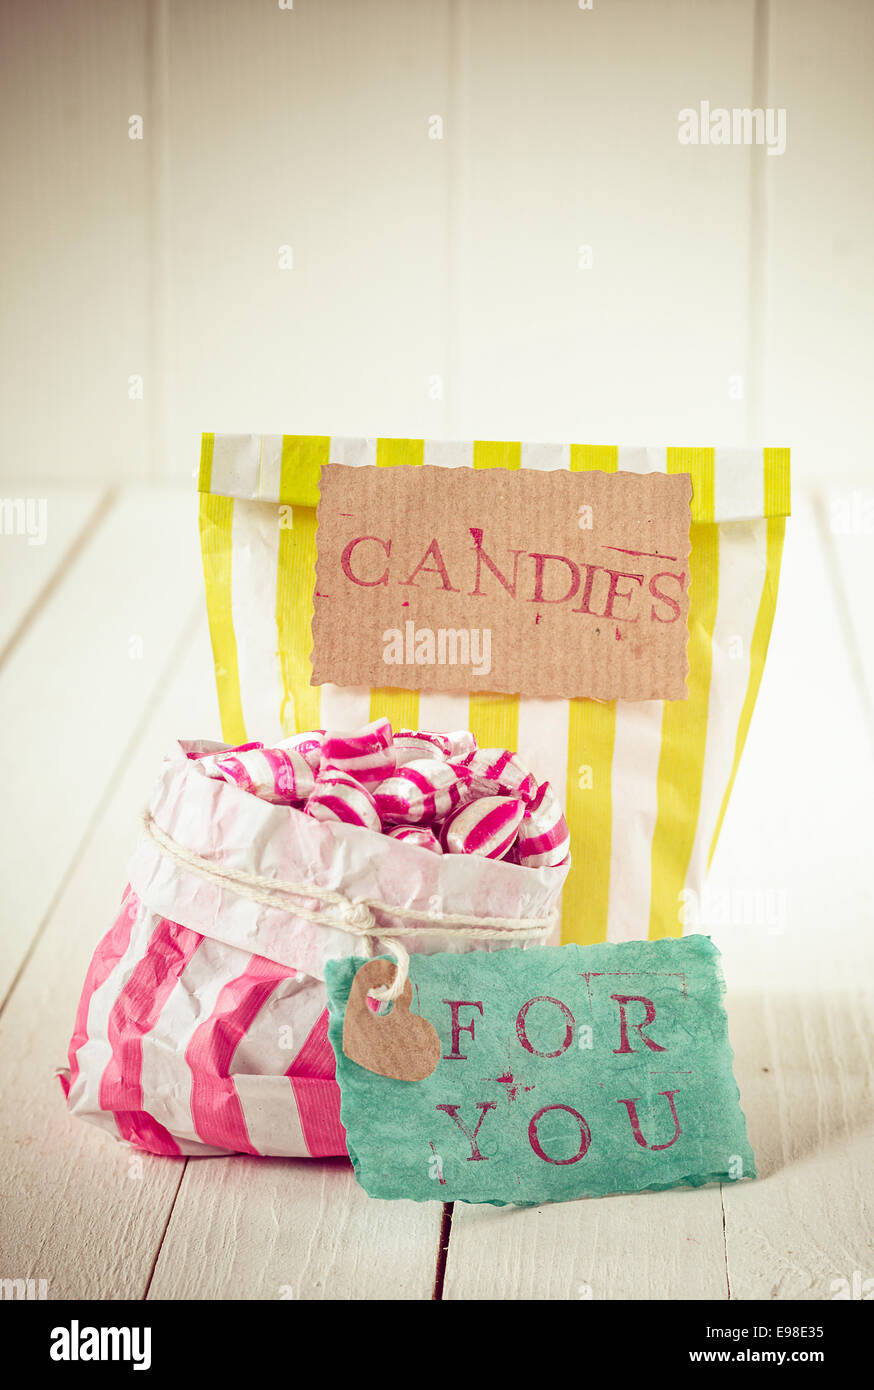 Two colorful bags with white, yellow and pink stripes filled with candies with romantic message in tags meaning, Candies For You, over a white wooden background Stock Photo